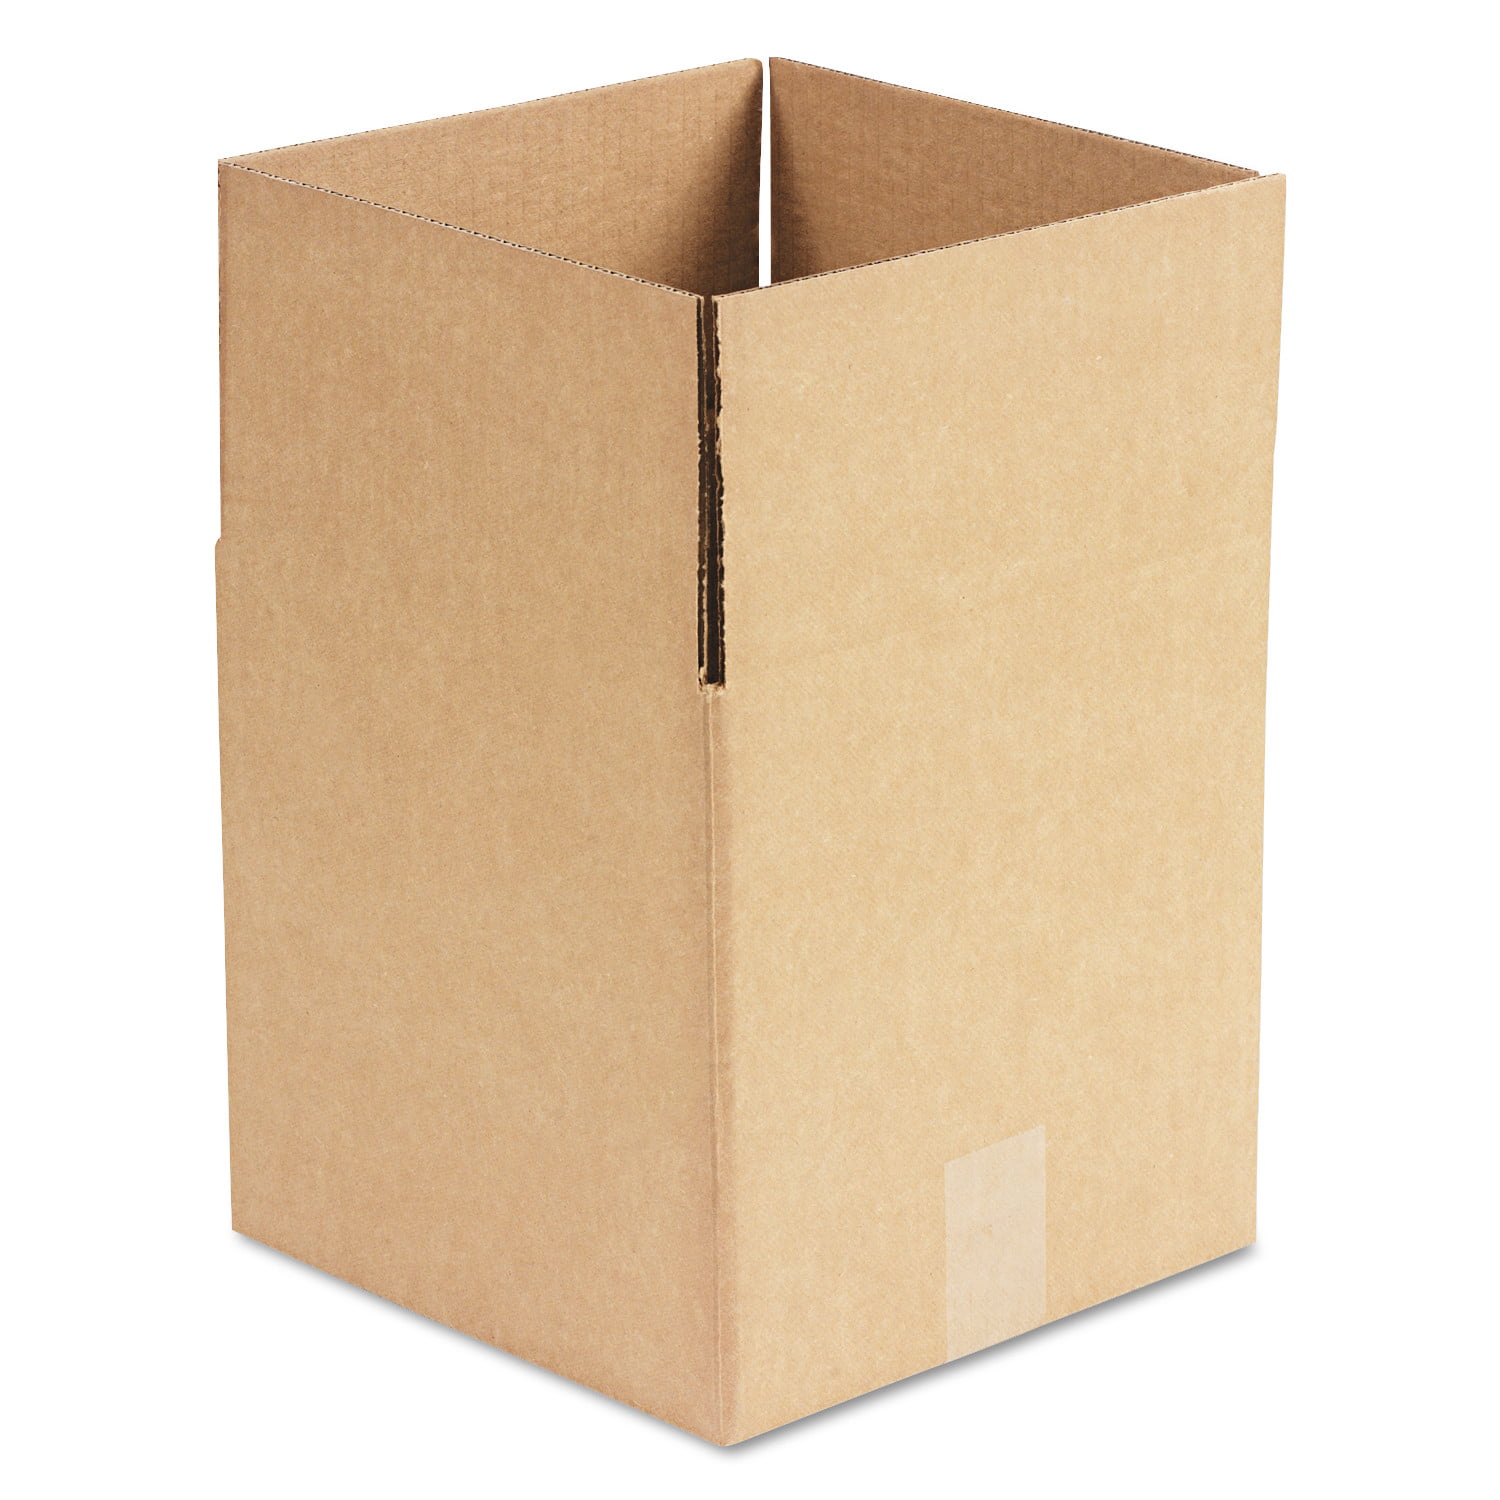 25 15x15x4 Cardboard Shipping Boxes Cartons Packing Moving Mailing Storage Box